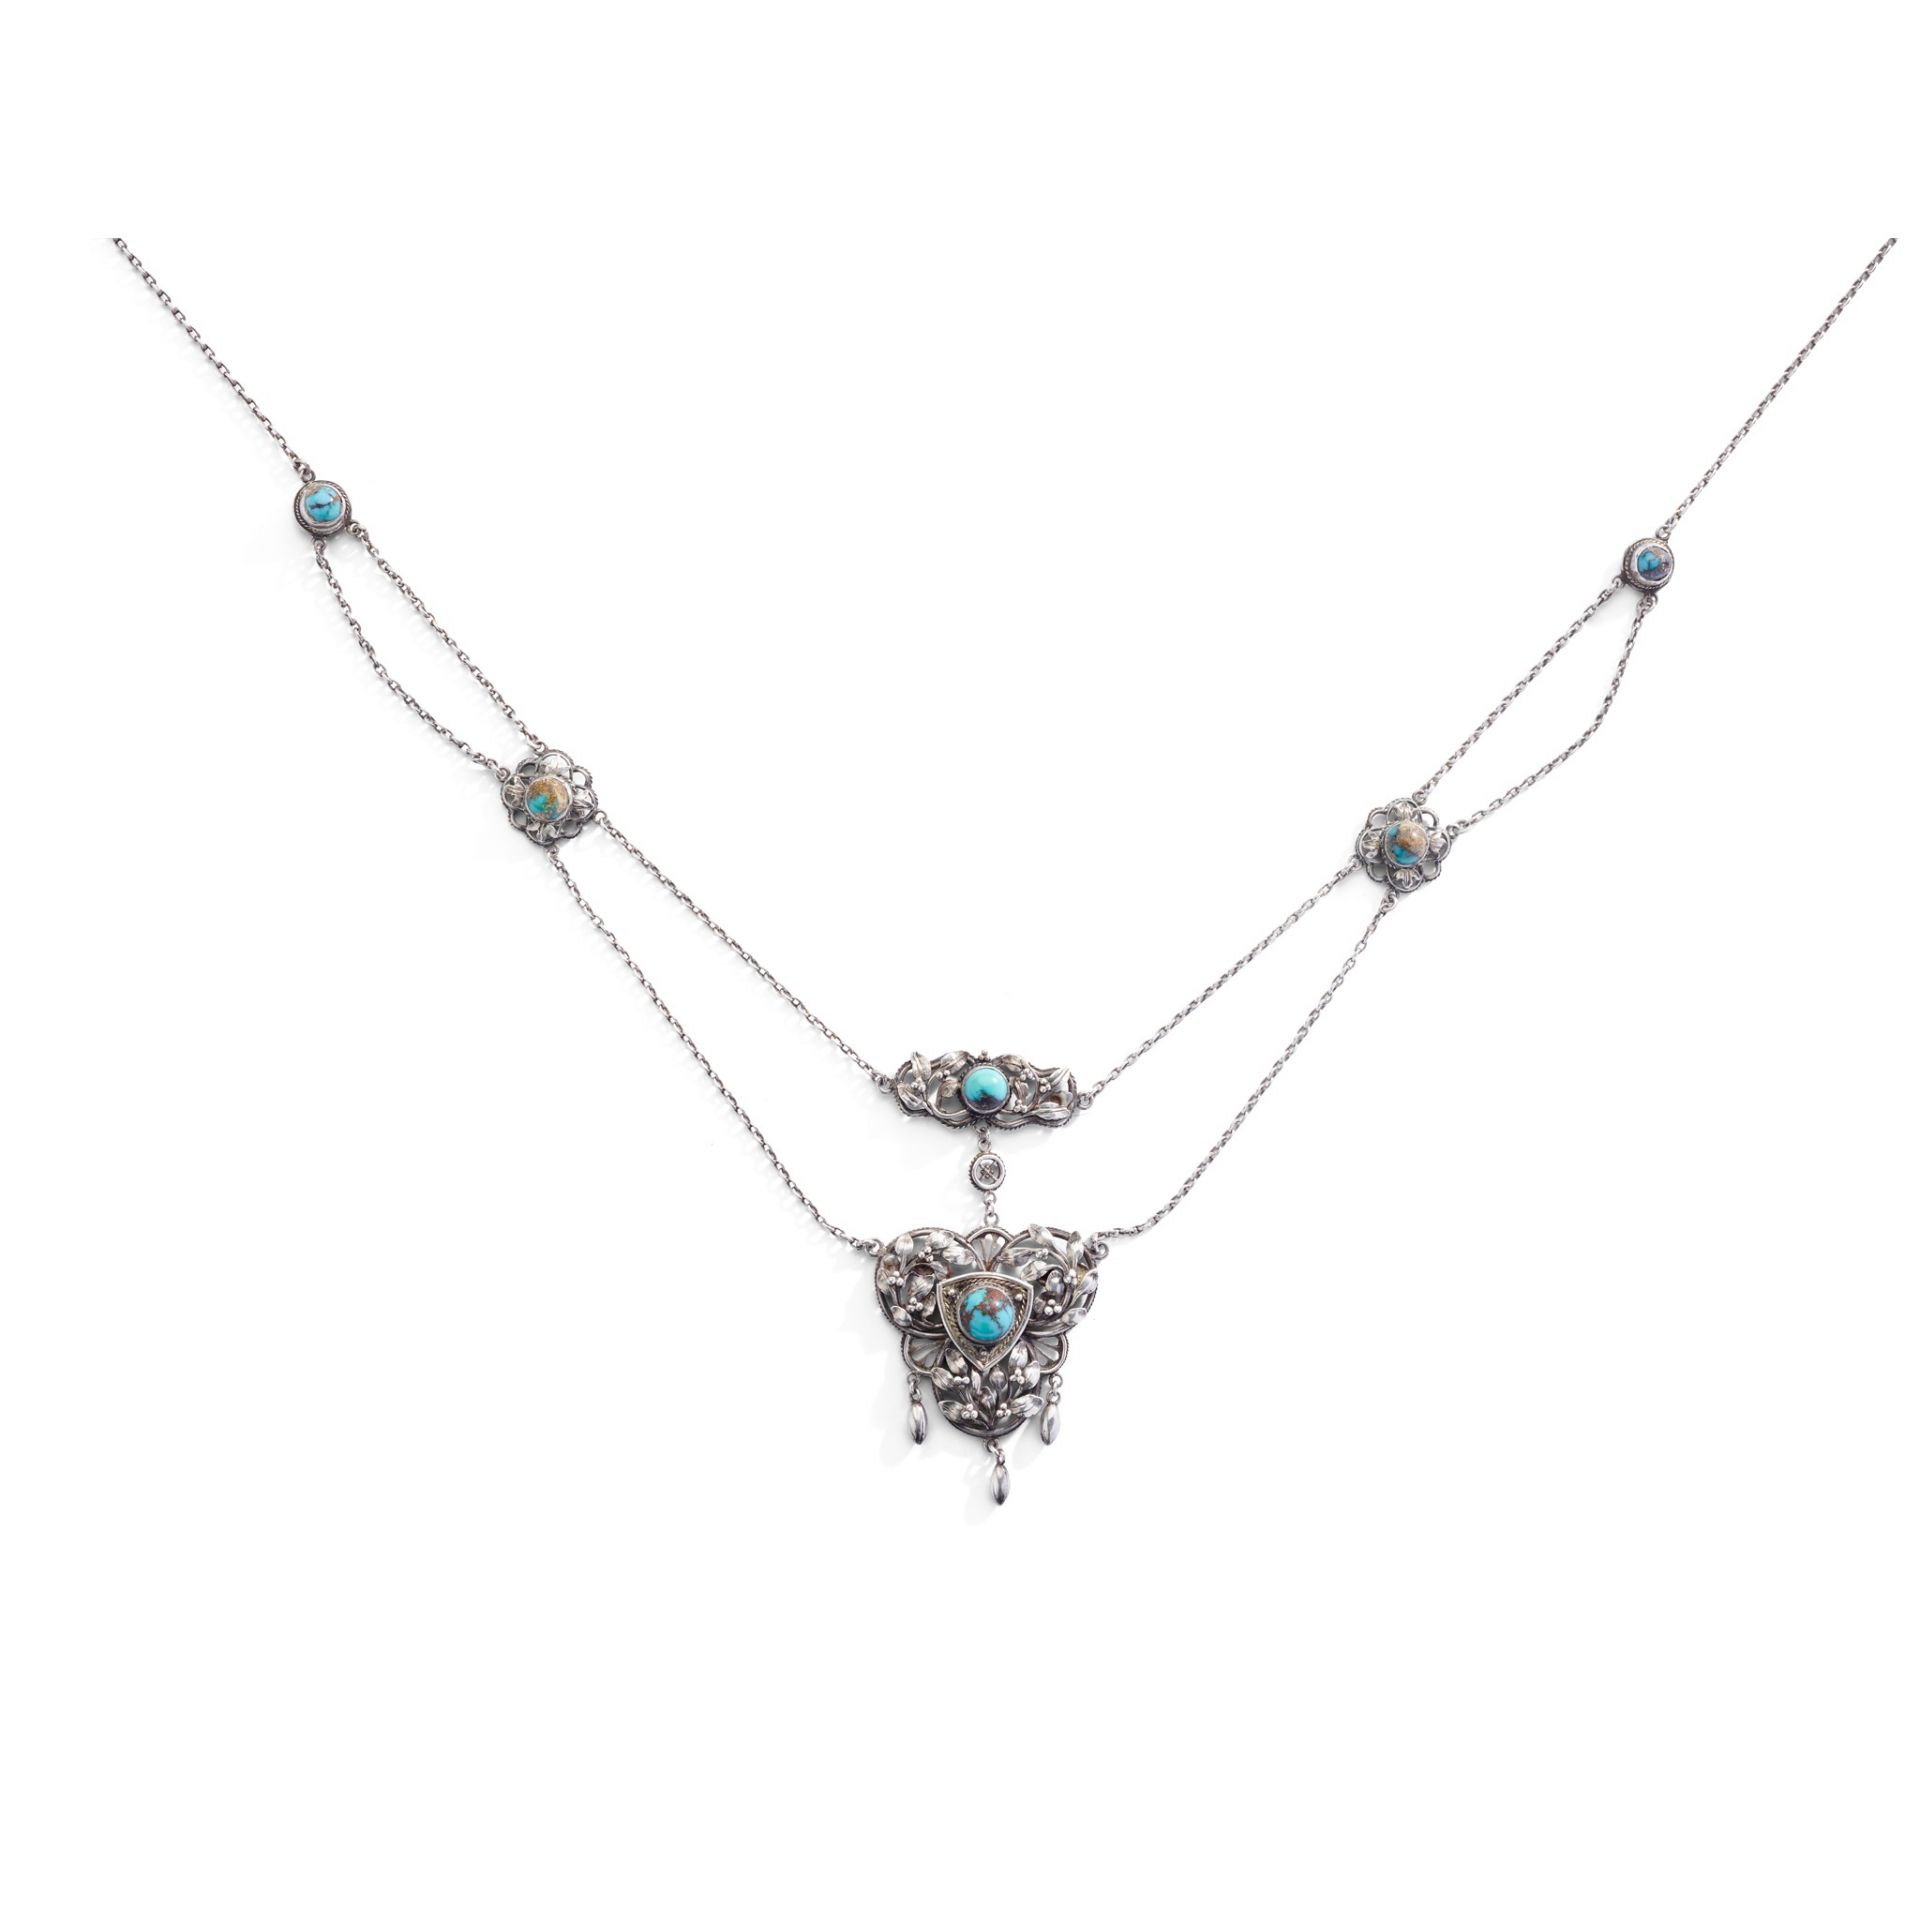 MANNER OF ARTIFICERS' GUILD ARTS & CRAFTS NECKLACE, CIRCA 1900